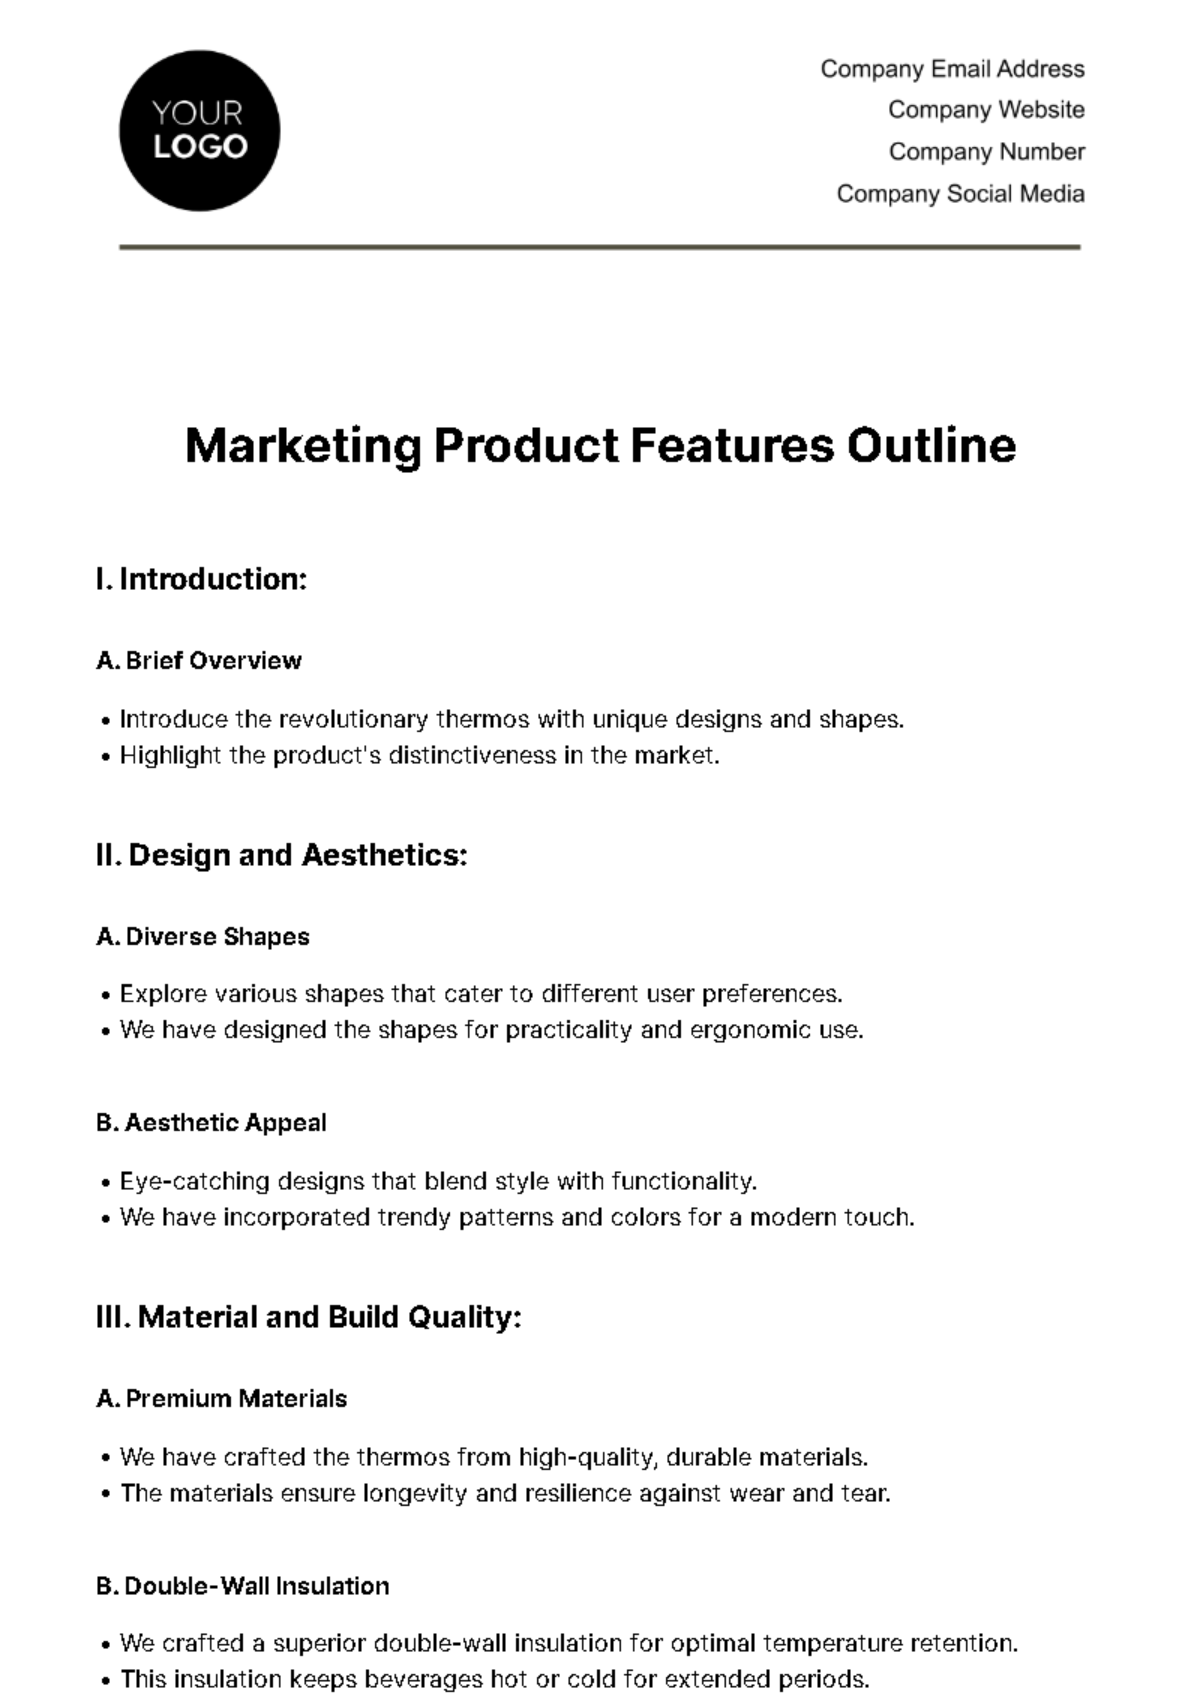 Marketing Product Features Outline Template